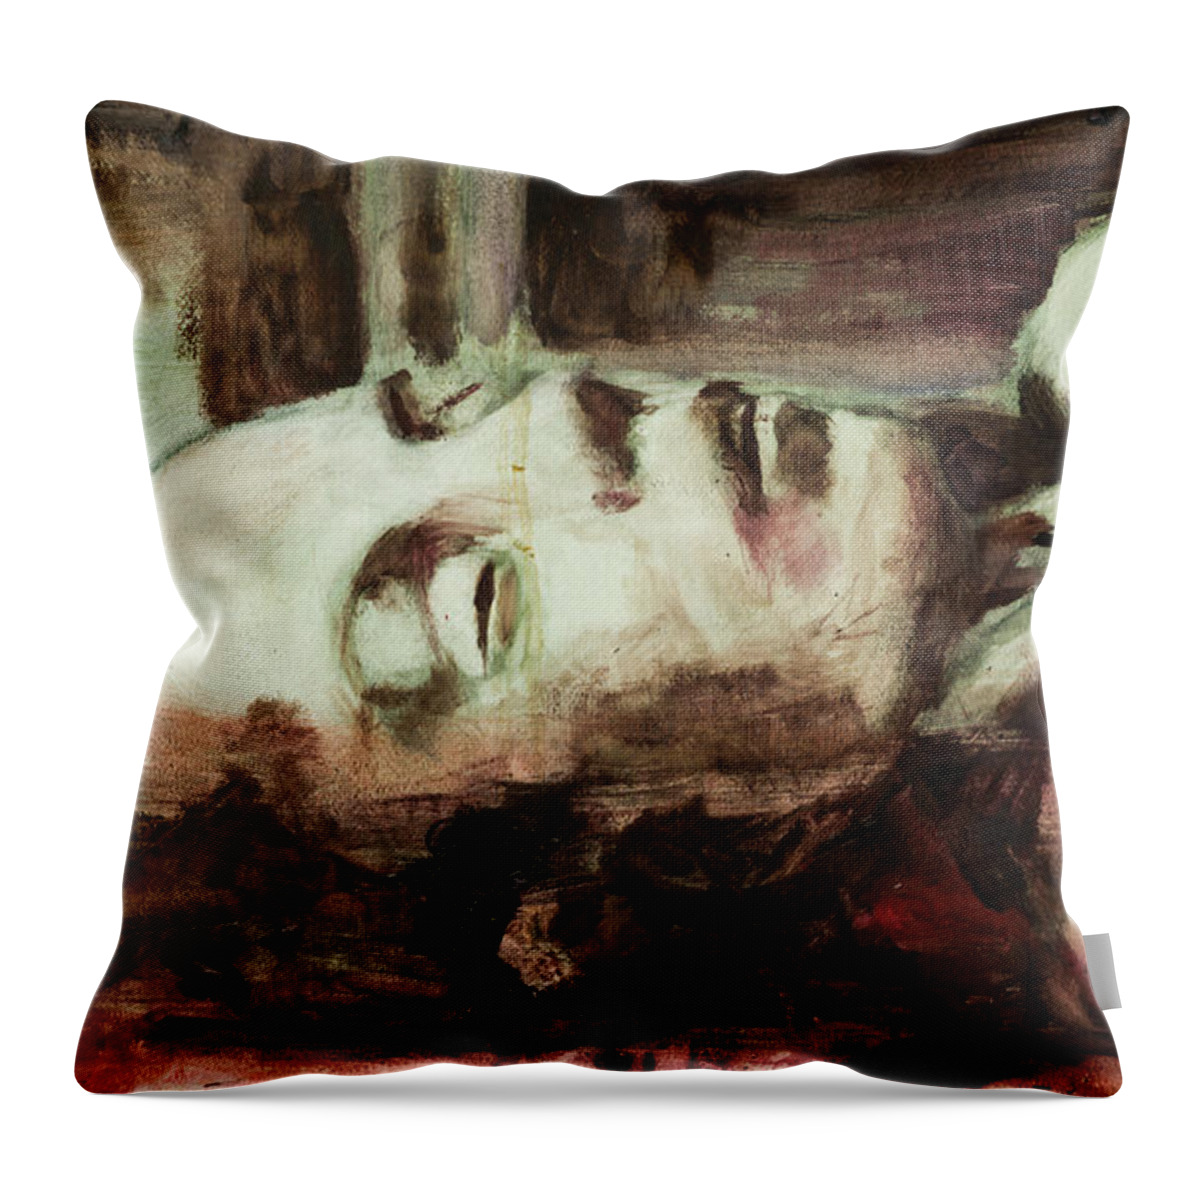 #acrylicpainting Throw Pillow featuring the painting And We Loved Each Other So Much, Study 7 by Veronica Huacuja